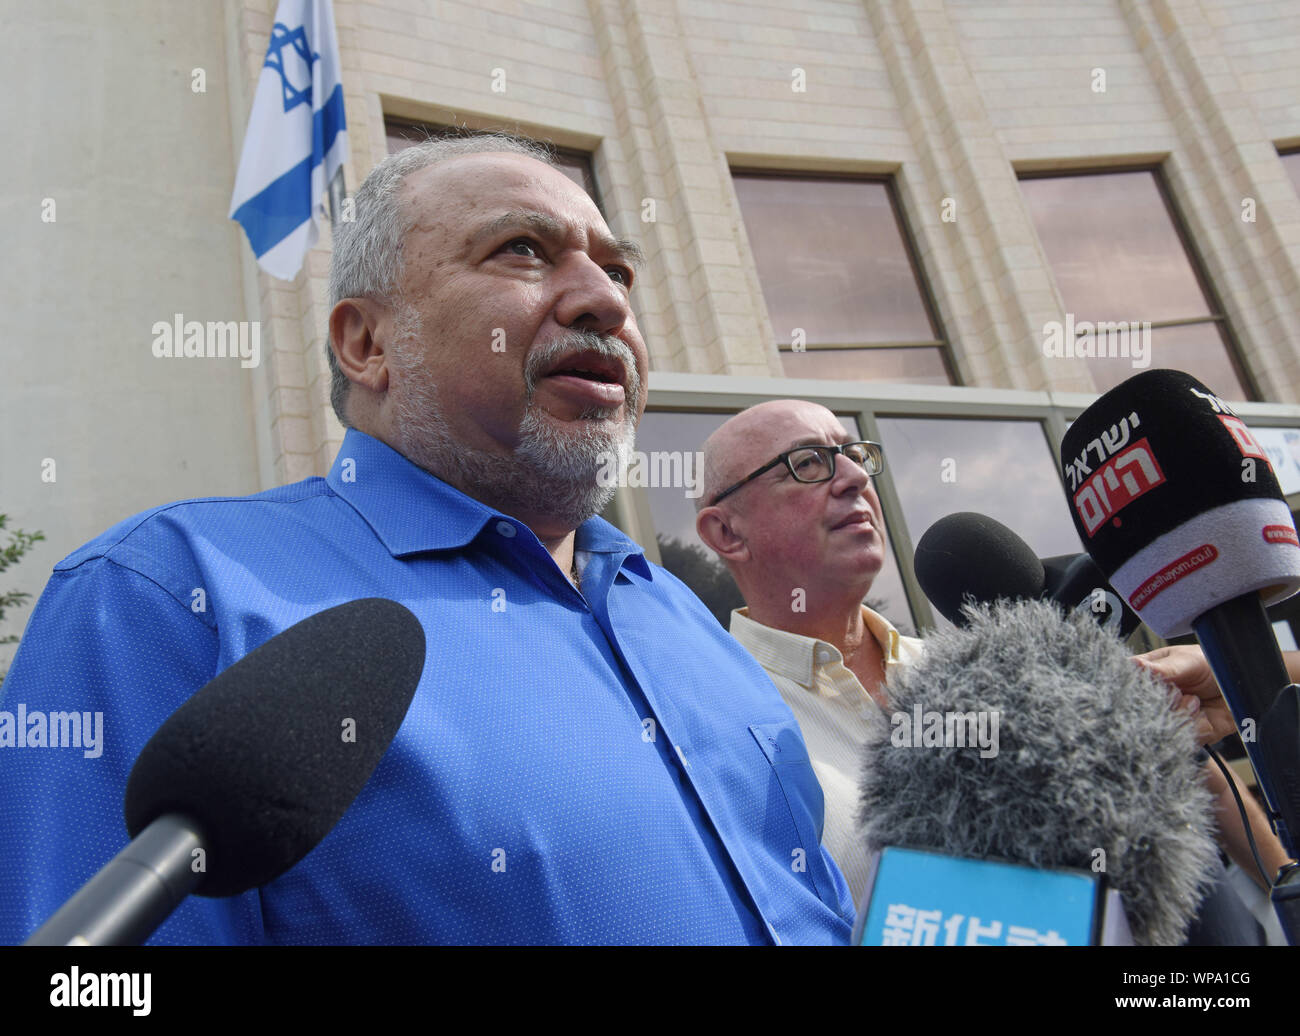 Maale Adumim Settlement, West Bank. 08th Sep, 2019. Israeli former defense minister and head of the Yisrael Beiteinu Party, Avigdor Lieberman, speaks to the press during a campaign stop in the Maale Adumim settlement in the West Bank, on Sunday, September 8, 2019. Lieberman promised sovereignty for Maale Adumim, the third largest West Bank settlement. Israelis return to the polls on September 17, for the second national election in 2019. Photo by Debbie Hill/UPI Credit: UPI/Alamy Live News Stock Photo